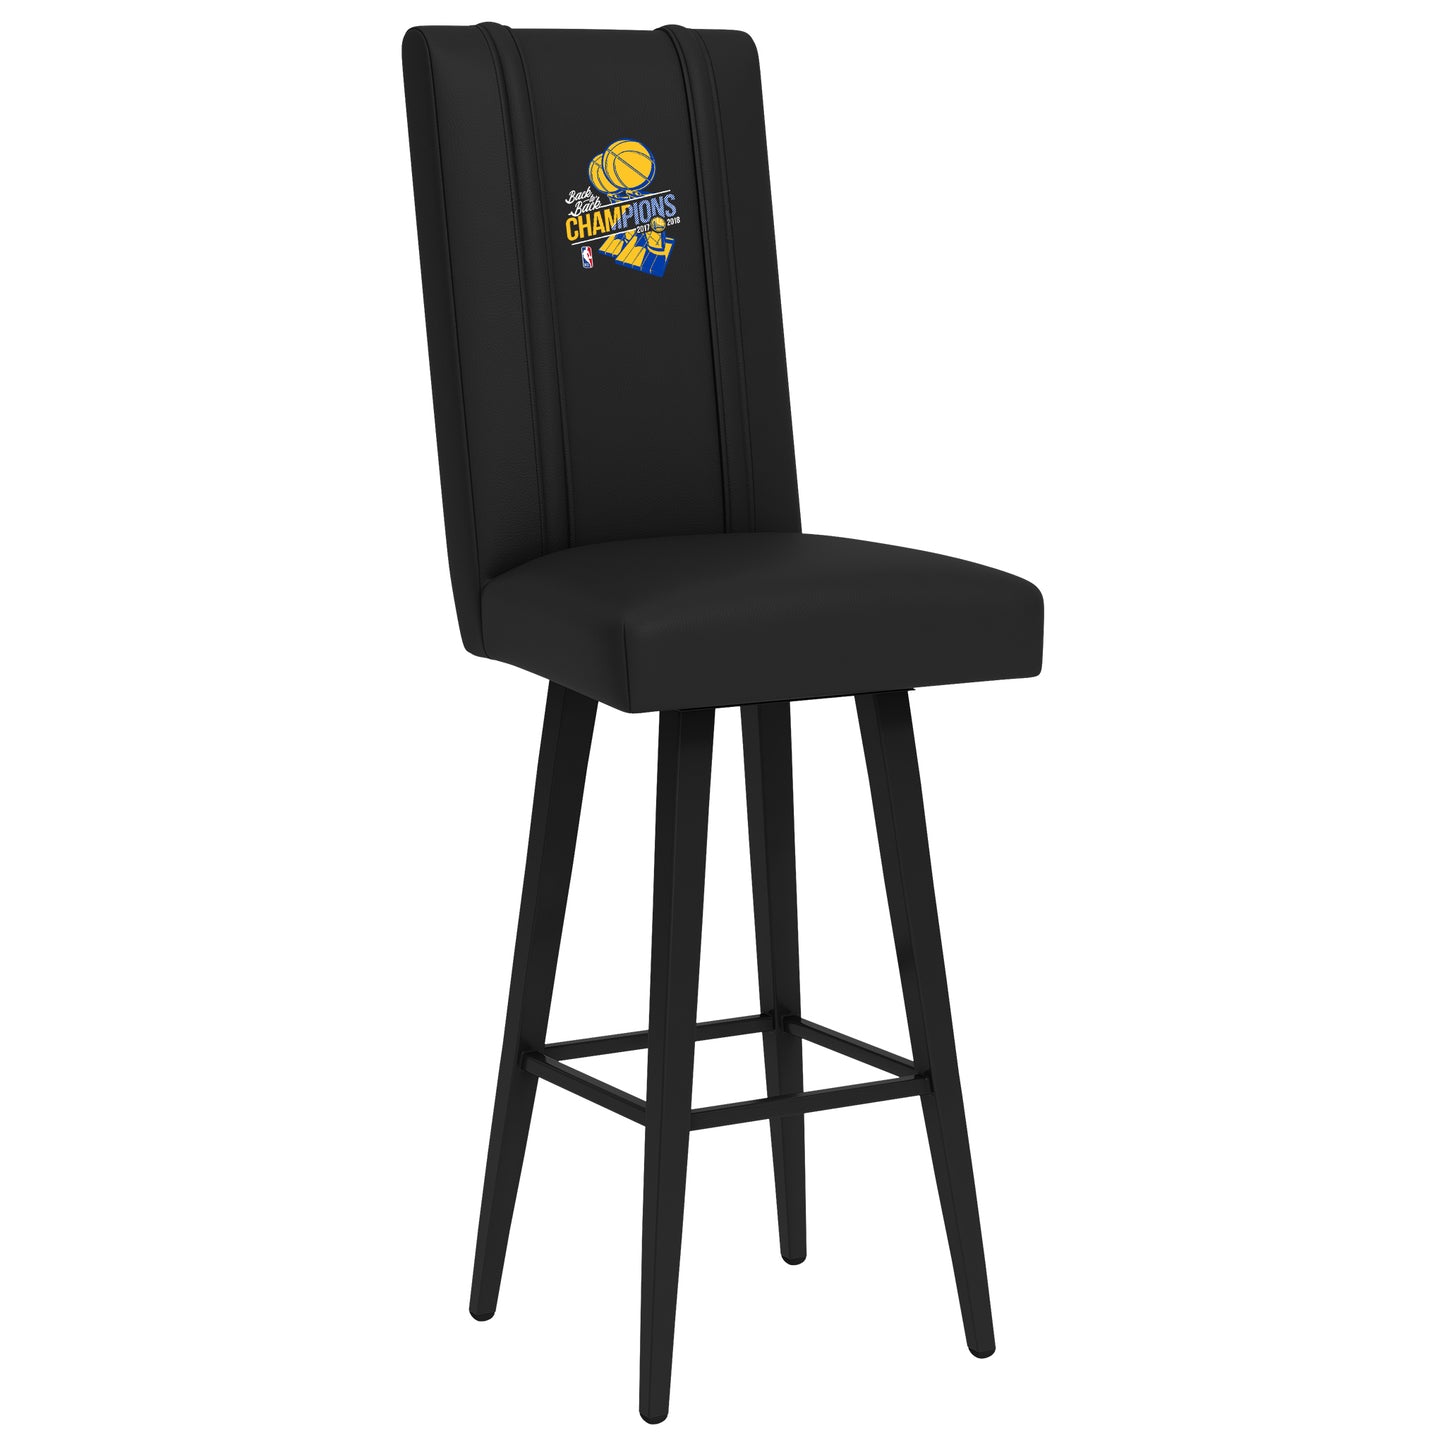 Swivel Bar Stool 2000 with Golden State Warriors 2018 Champions Logo Panel